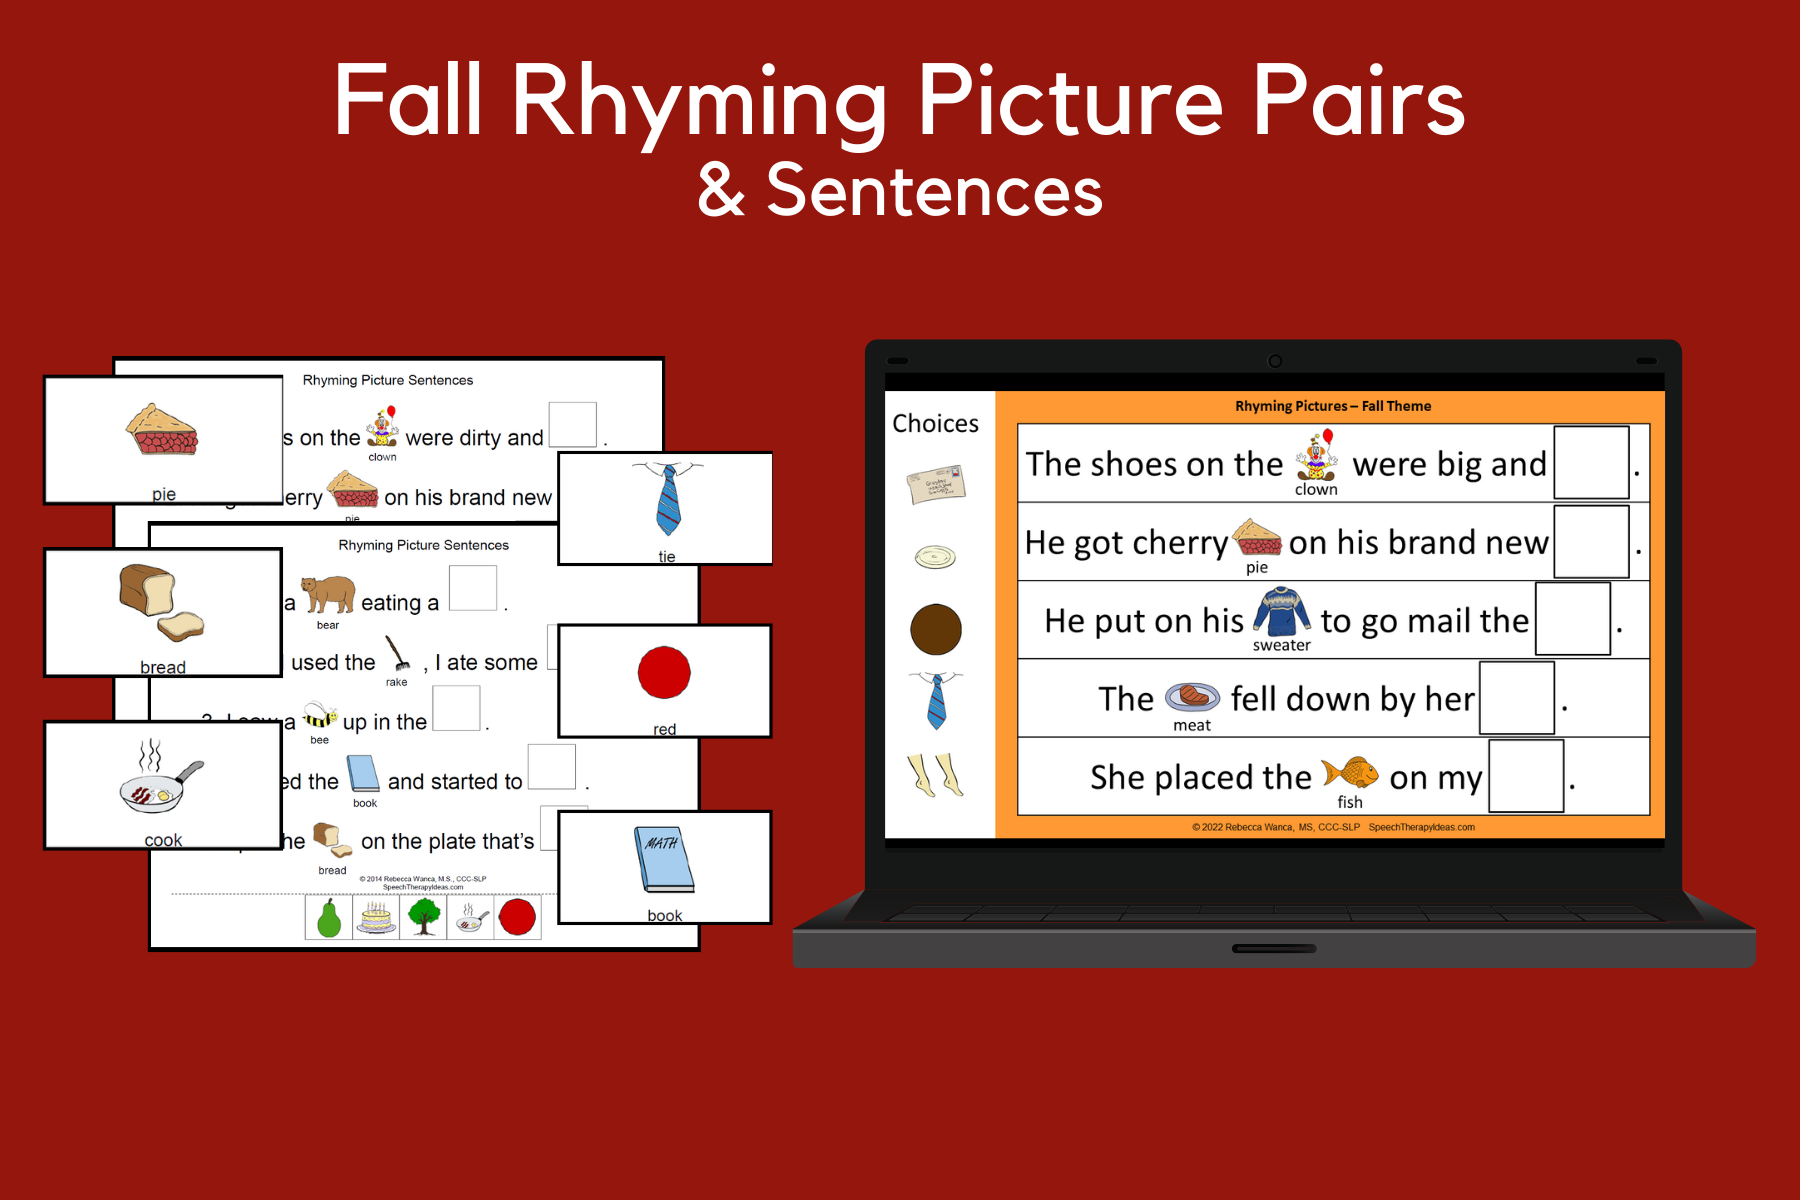 Fall Rhyming Picture Pairs and Sentences